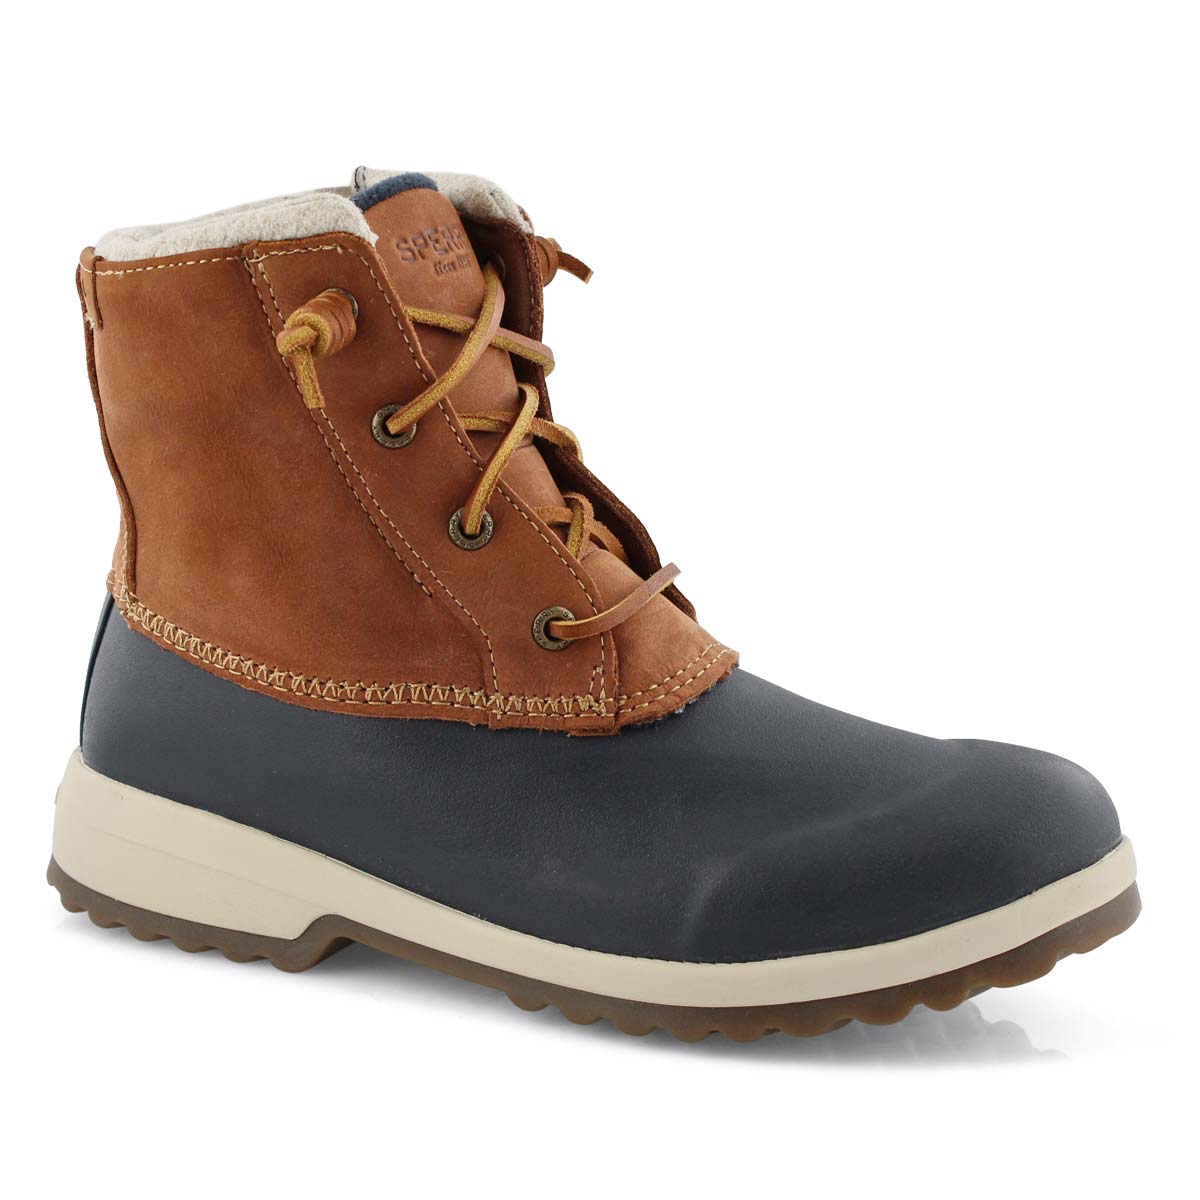 sperry maritime repel boot